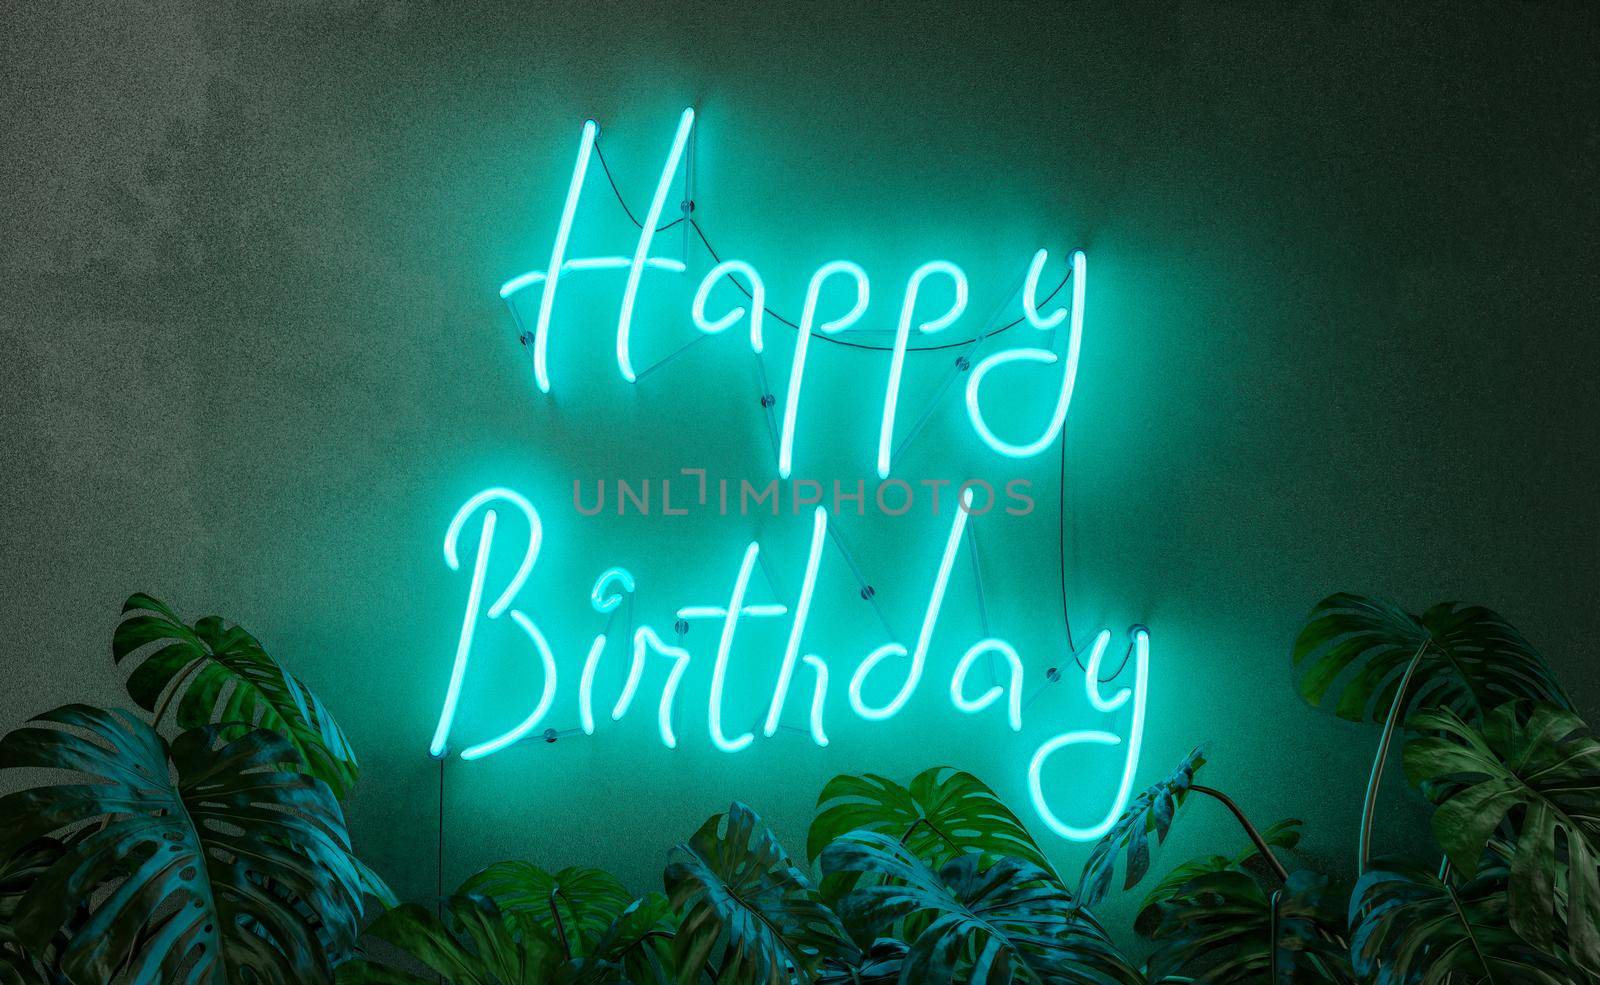 Happy birthday neon sign with plants in front of it. 3d rendering